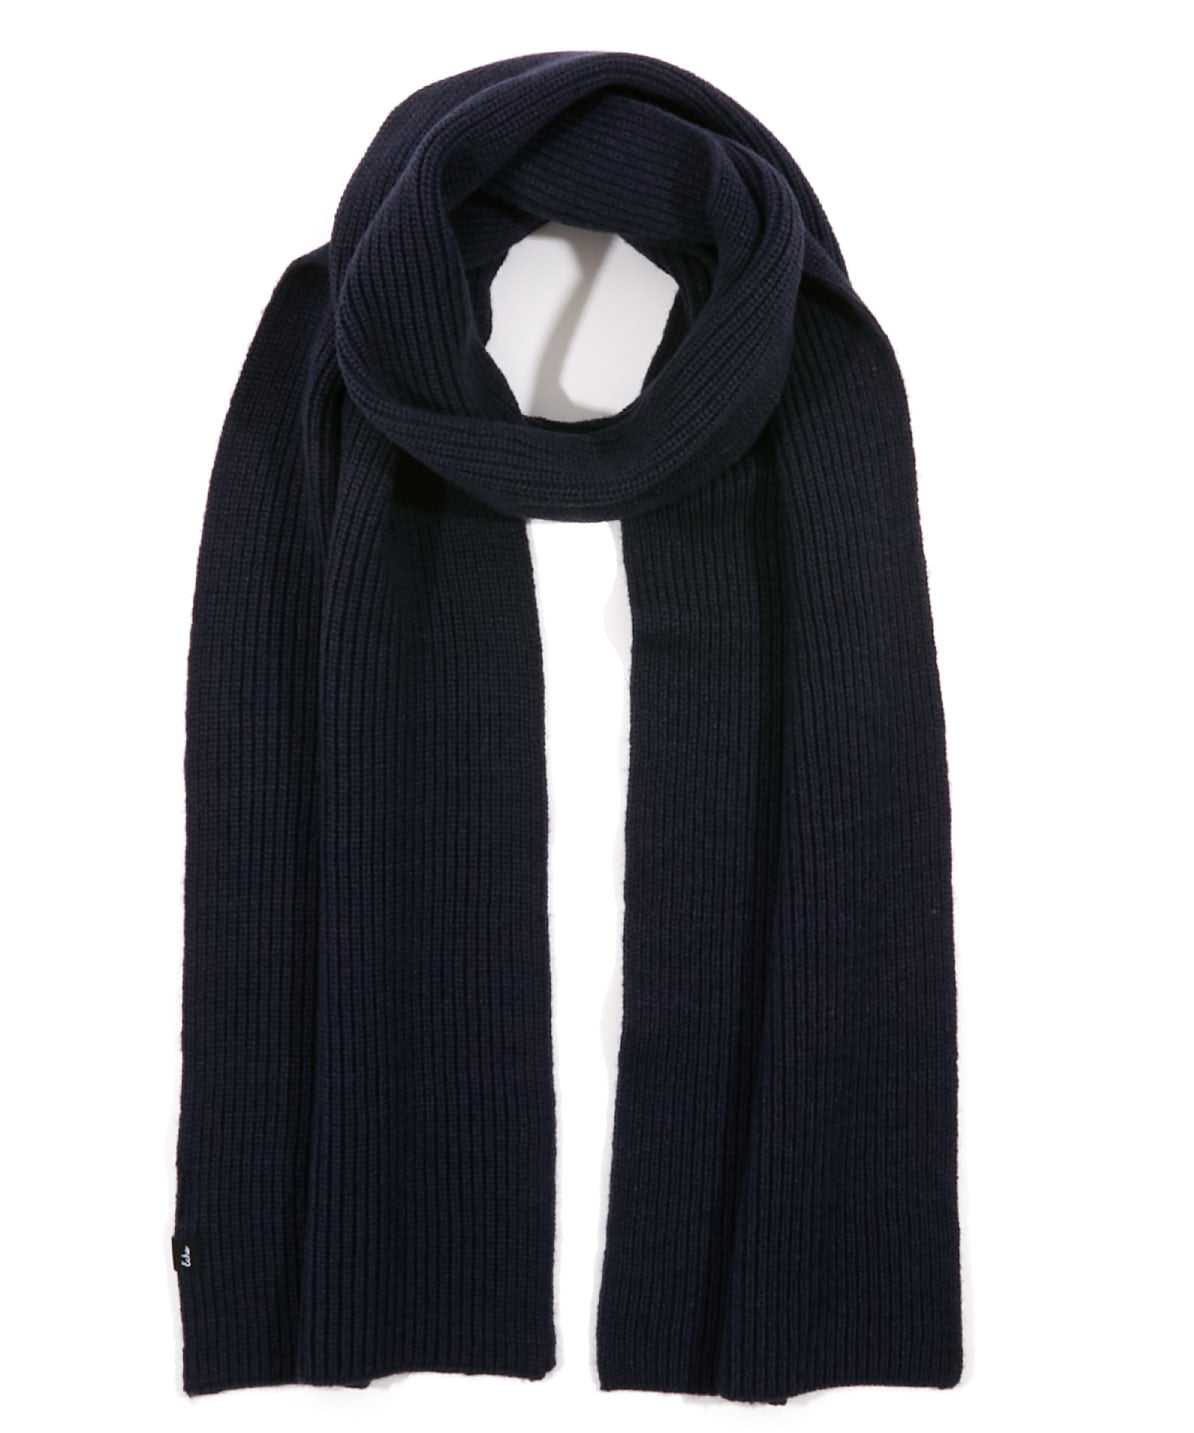 Radiant Scarf in color Navy